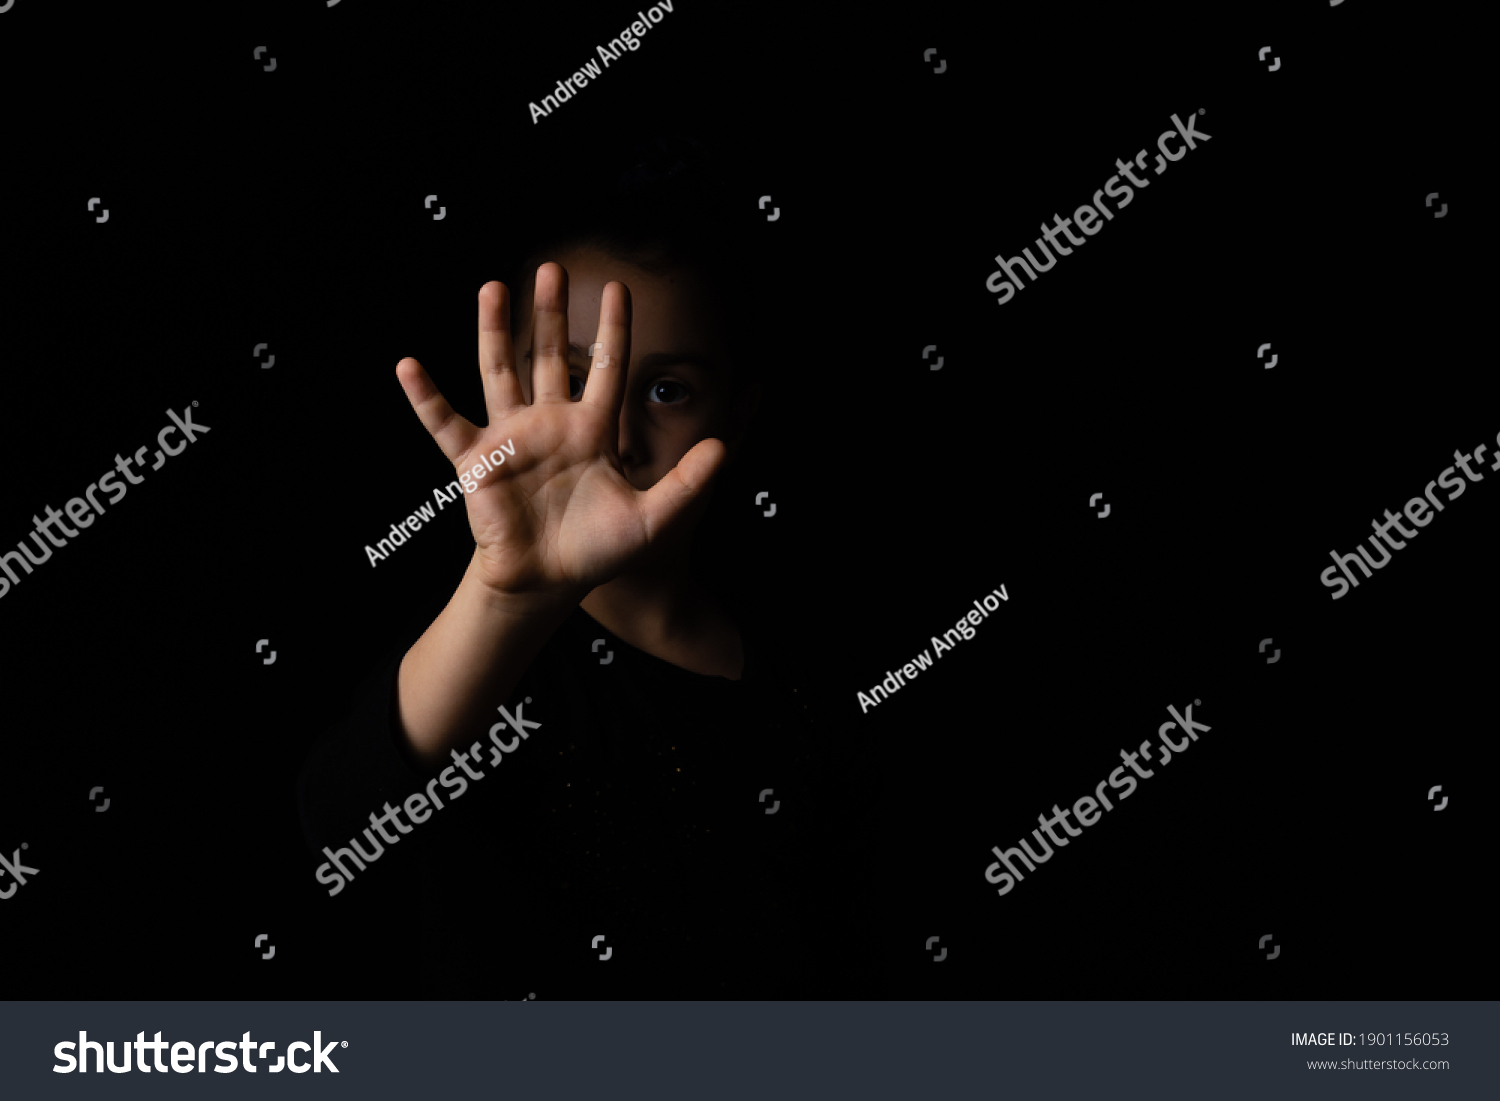 little girl with a raised hand making a stop sign gesture on a black background. Violence, harassment and child abuse prevention concept. #1901156053